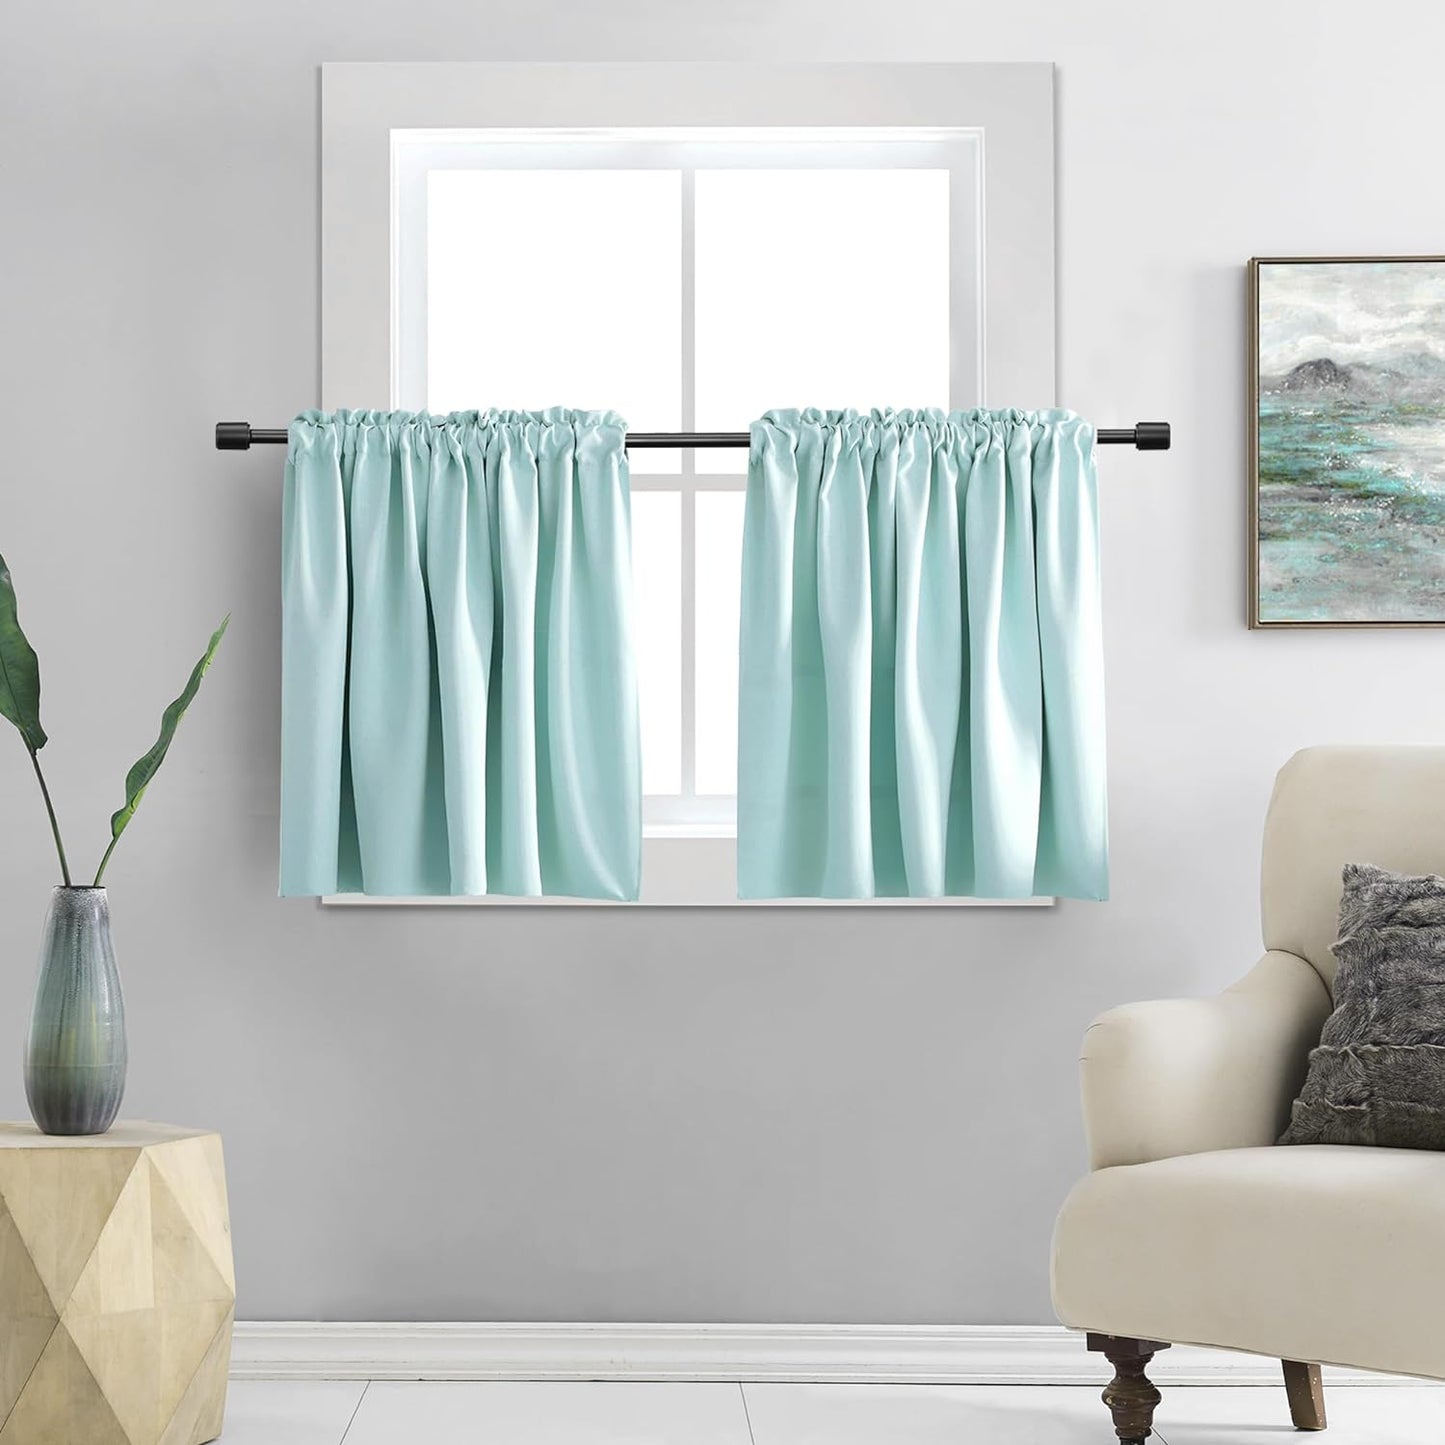 DONREN 24 Inch Length Curtains- 2 Panels Blackout Thermal Insulating Small Curtain Tiers for Bathroom with Rod Pocket (Black,42 Inch Width)  DONREN Aqua 42" X 30" 